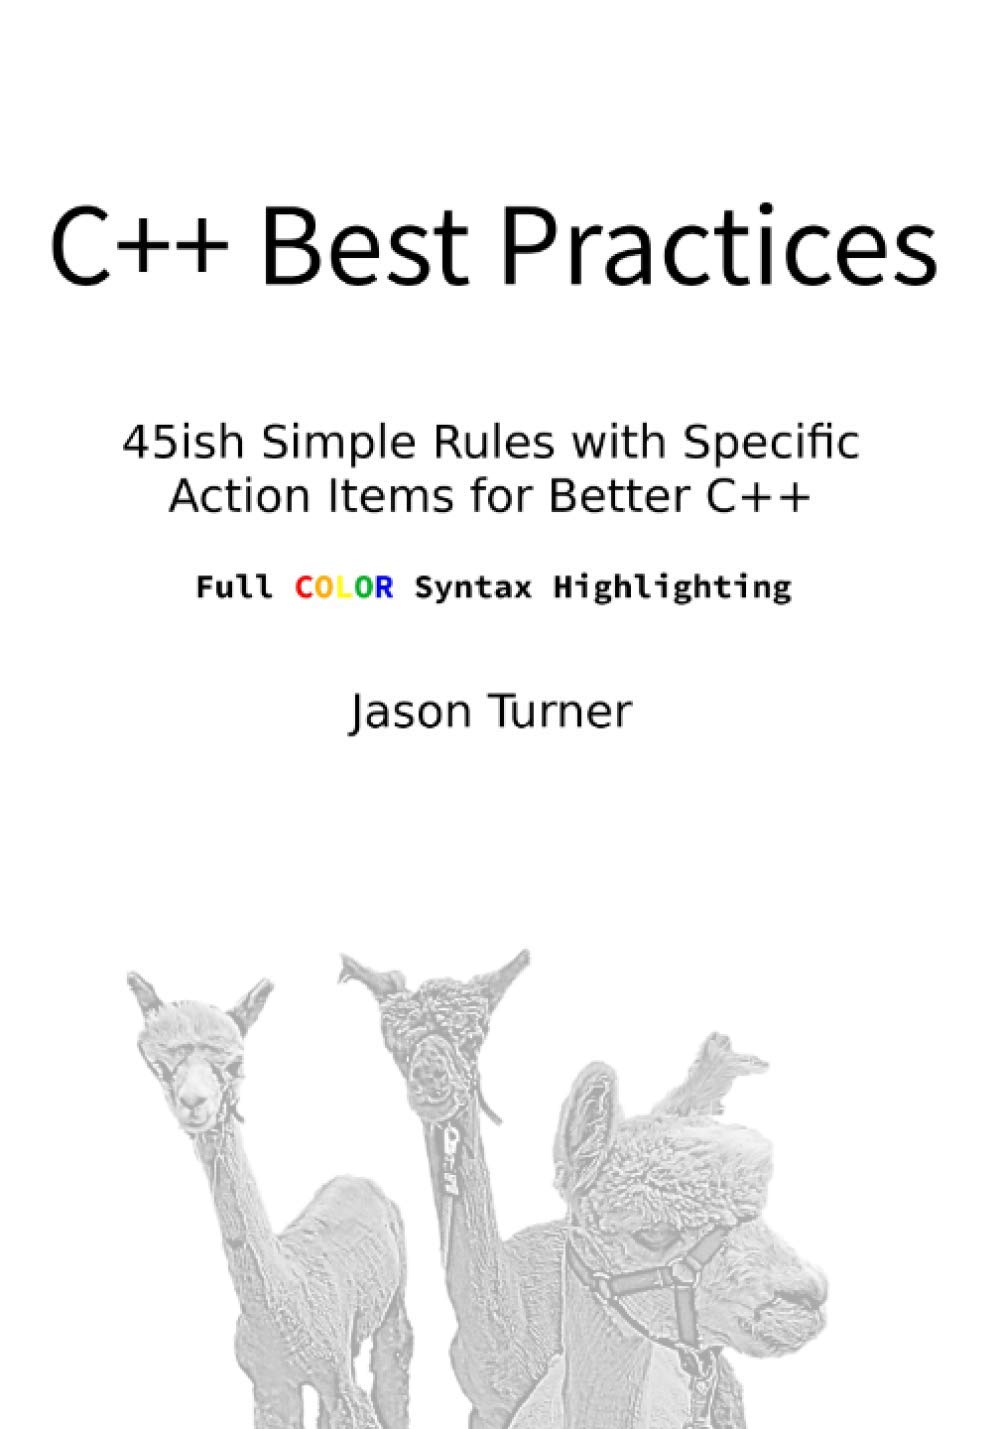 C++ Best Practices (Full Color Syntax Highlighting): 45ish Simple Rules with Specific Action Items for Better C++ by  Jason Turner